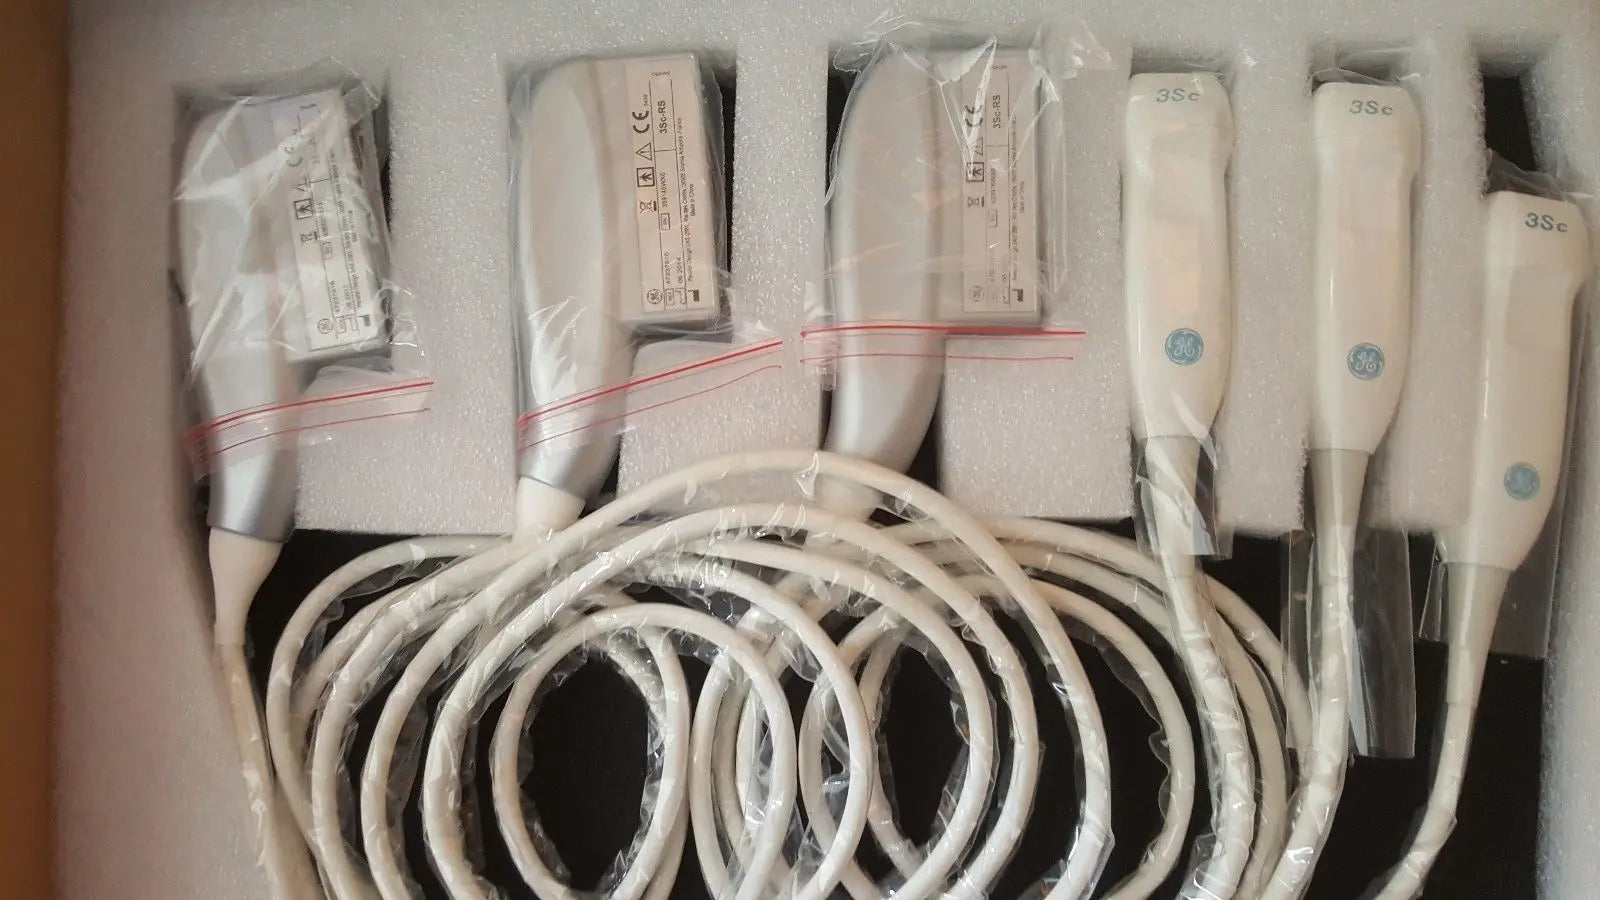 GE 3Sc-RS Ultrasound Probe / Transducer  demo Condition DIAGNOSTIC ULTRASOUND MACHINES FOR SALE